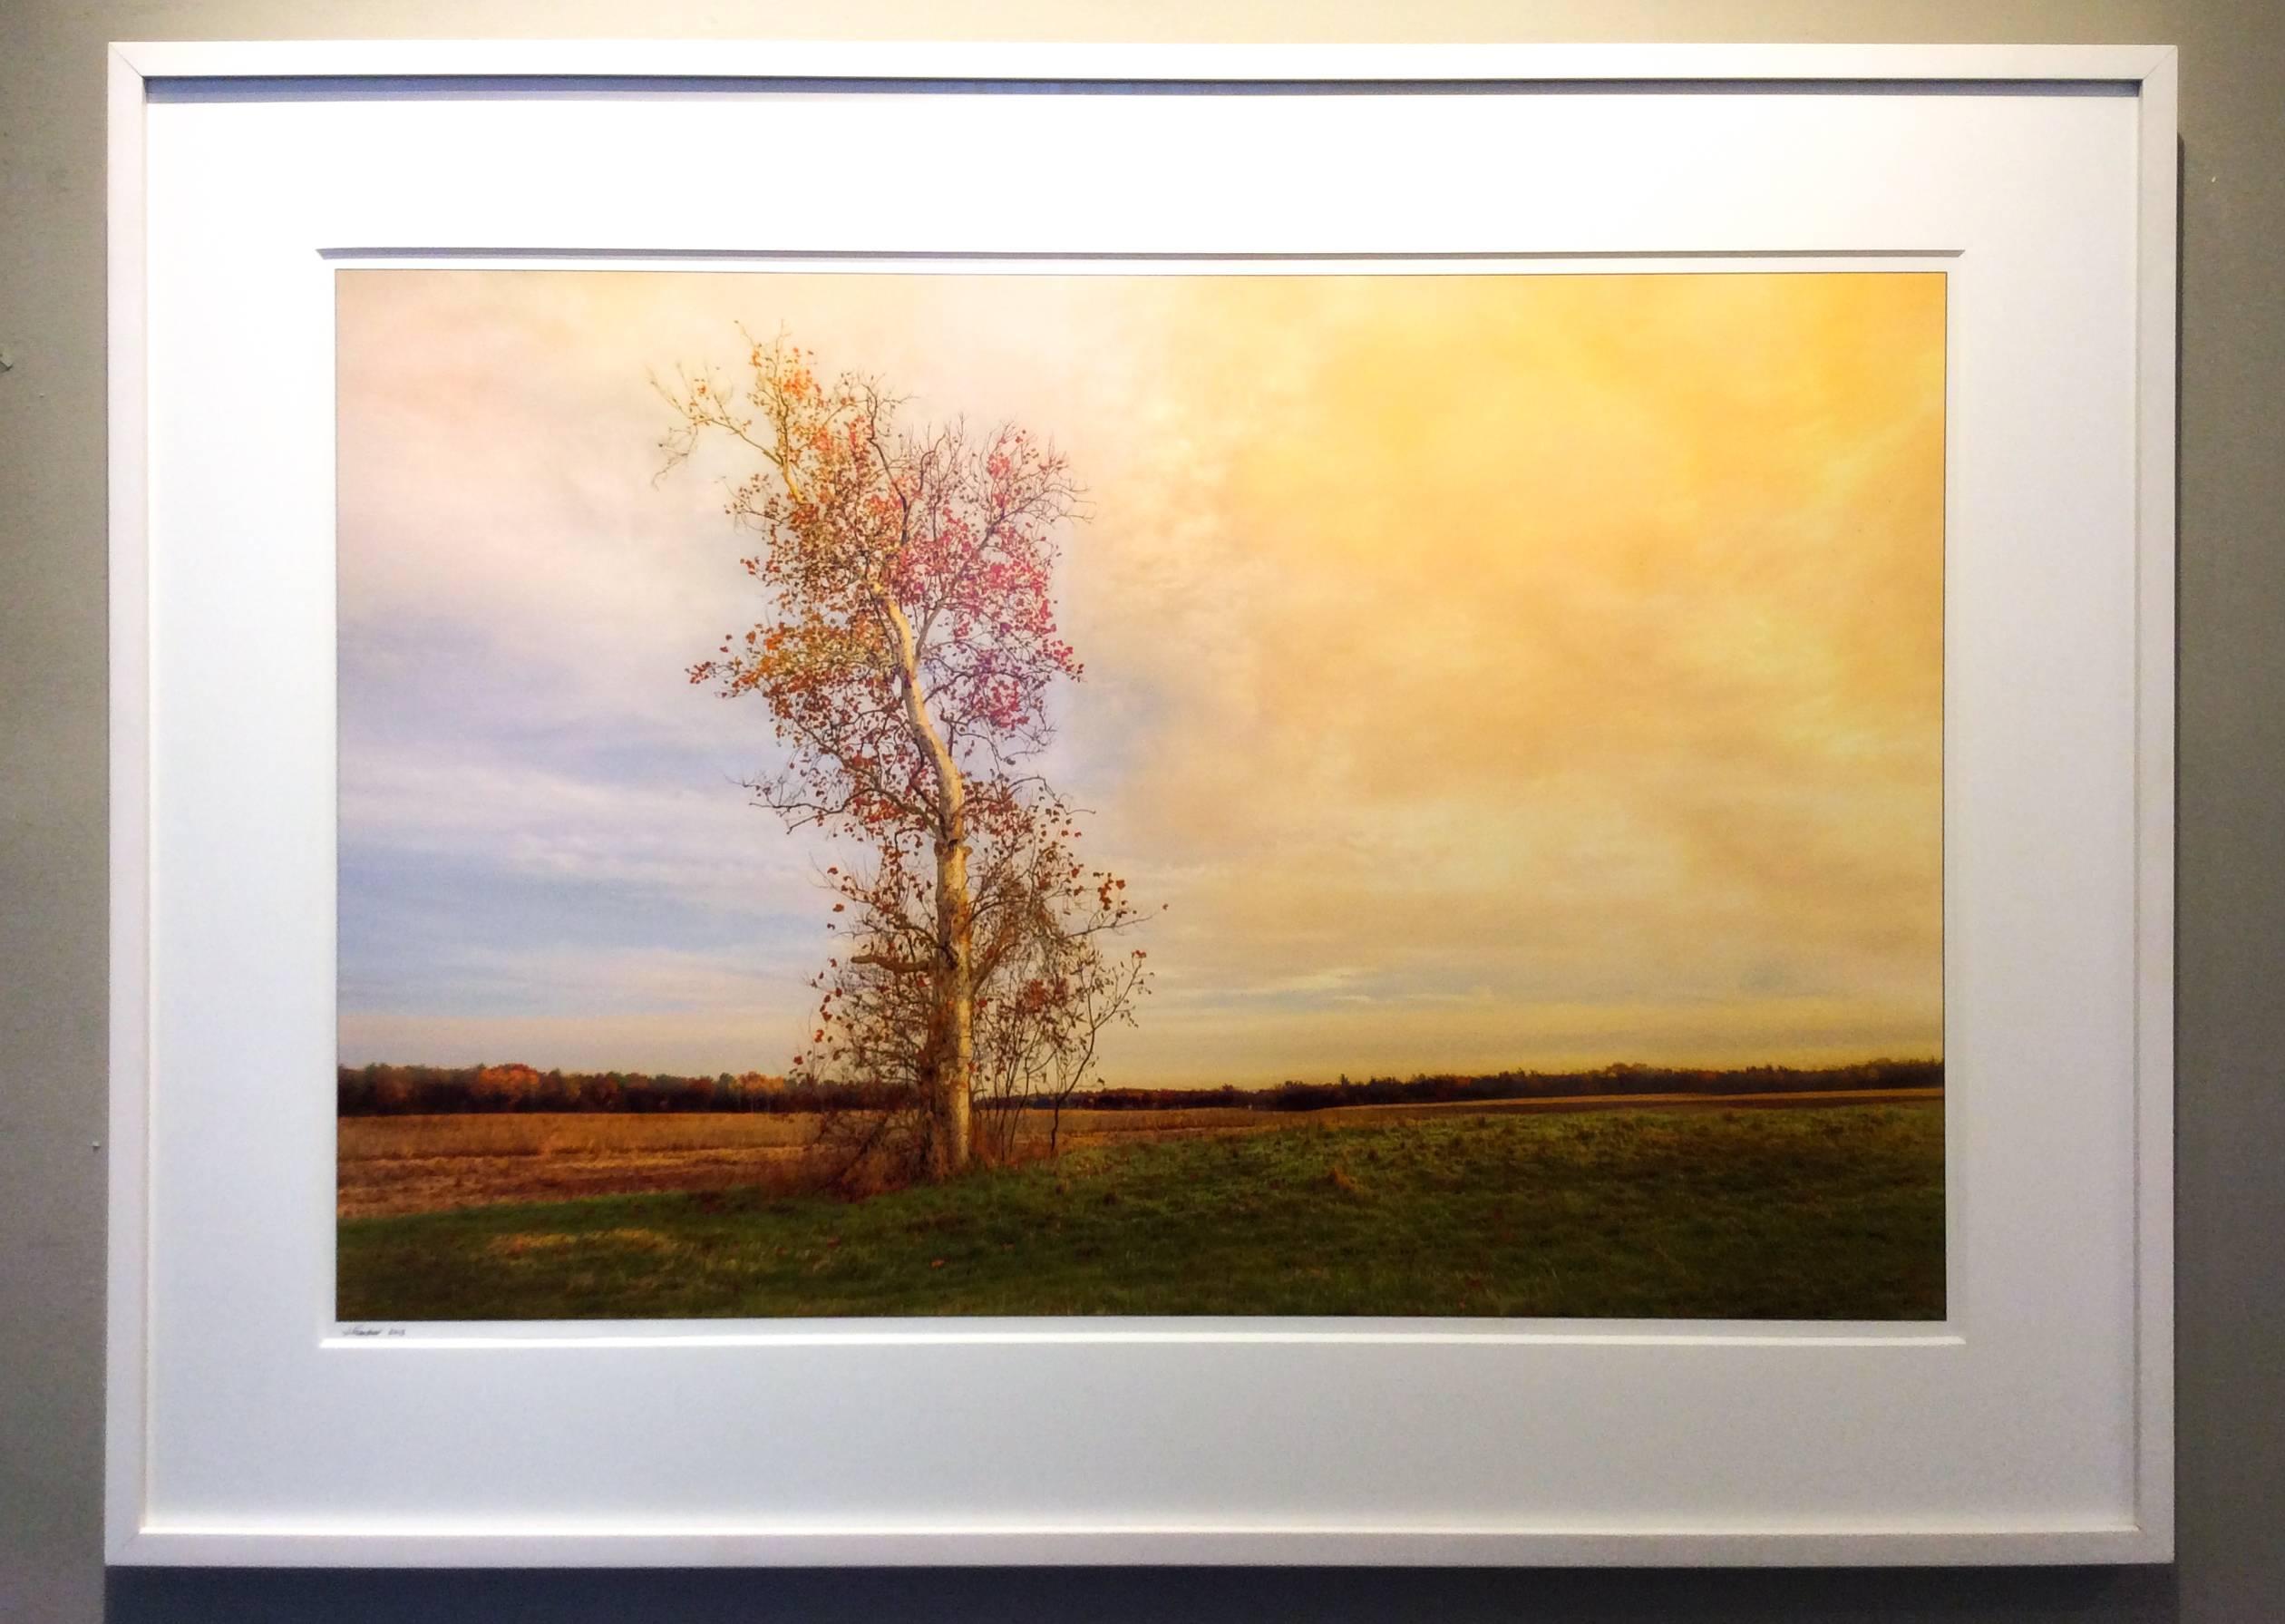 Farm Fields 11 (Landscape Photograph of a Country Field at Sunset, Framed) - Beige Color Photograph by Jerry Freedner